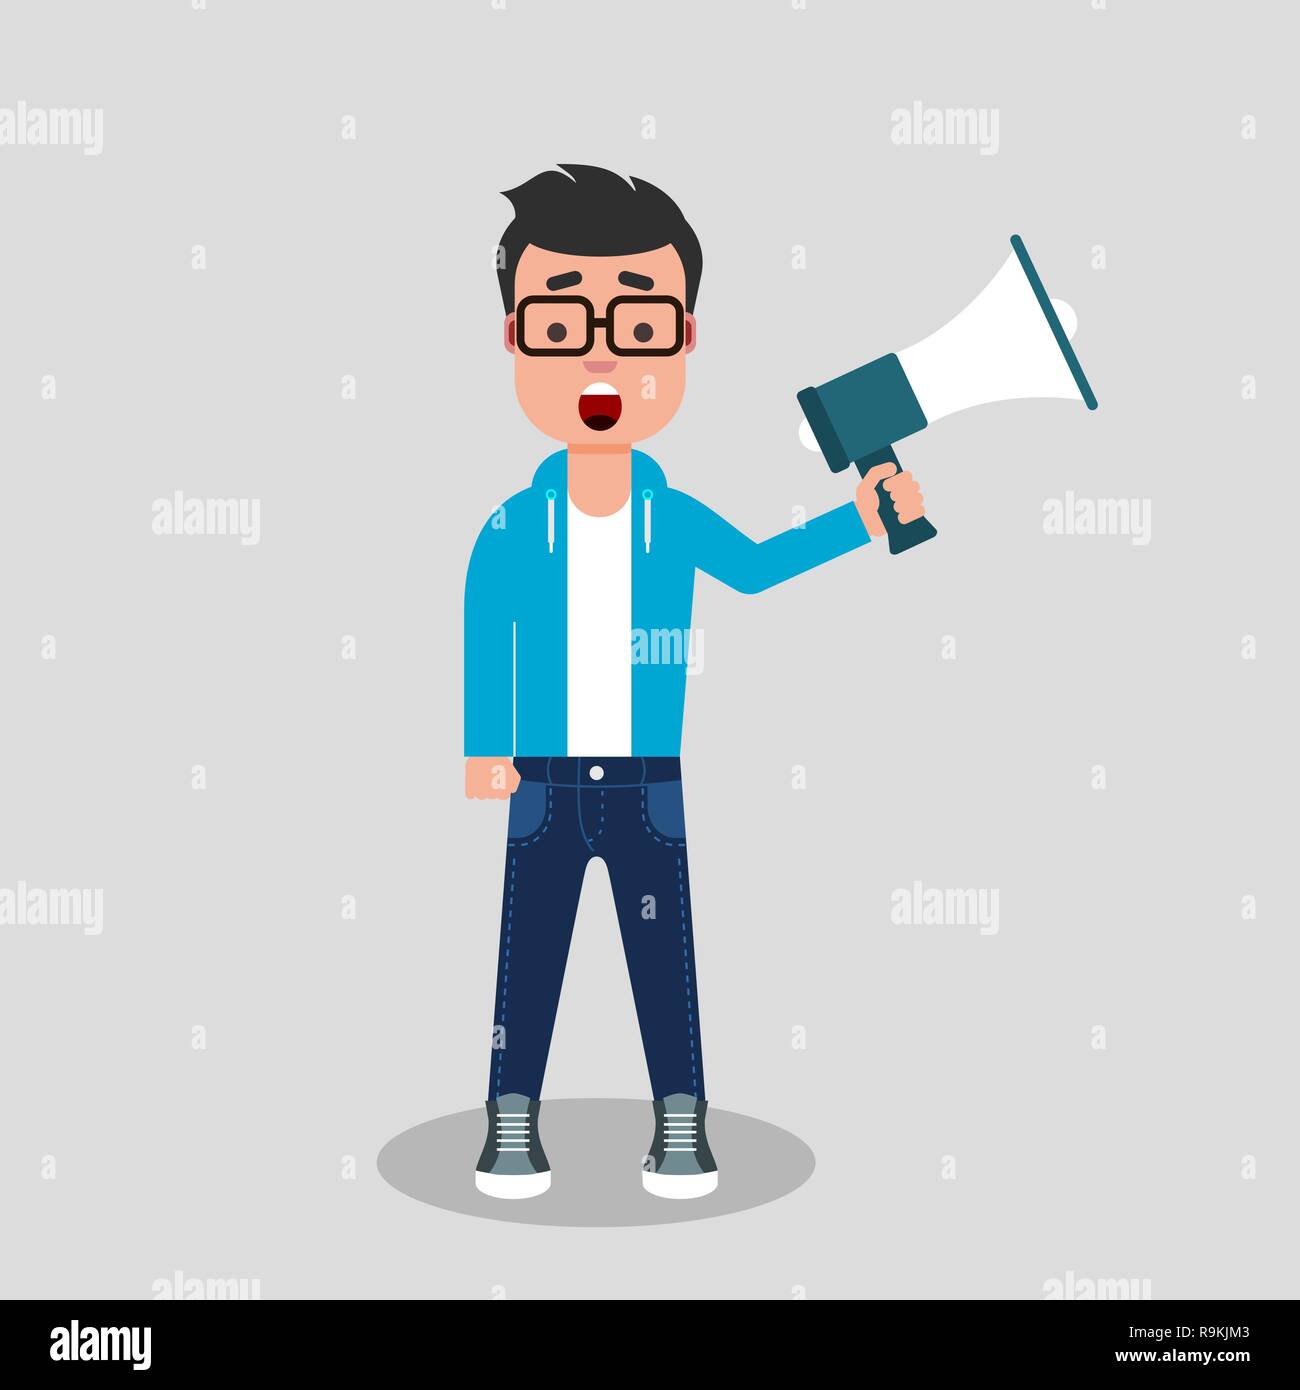 Young man in jeans and sweatshirt protests with a megaphone in his hand. Human rights, fight for freedom, riot, concept. Stock Vector illustration Stock Vector